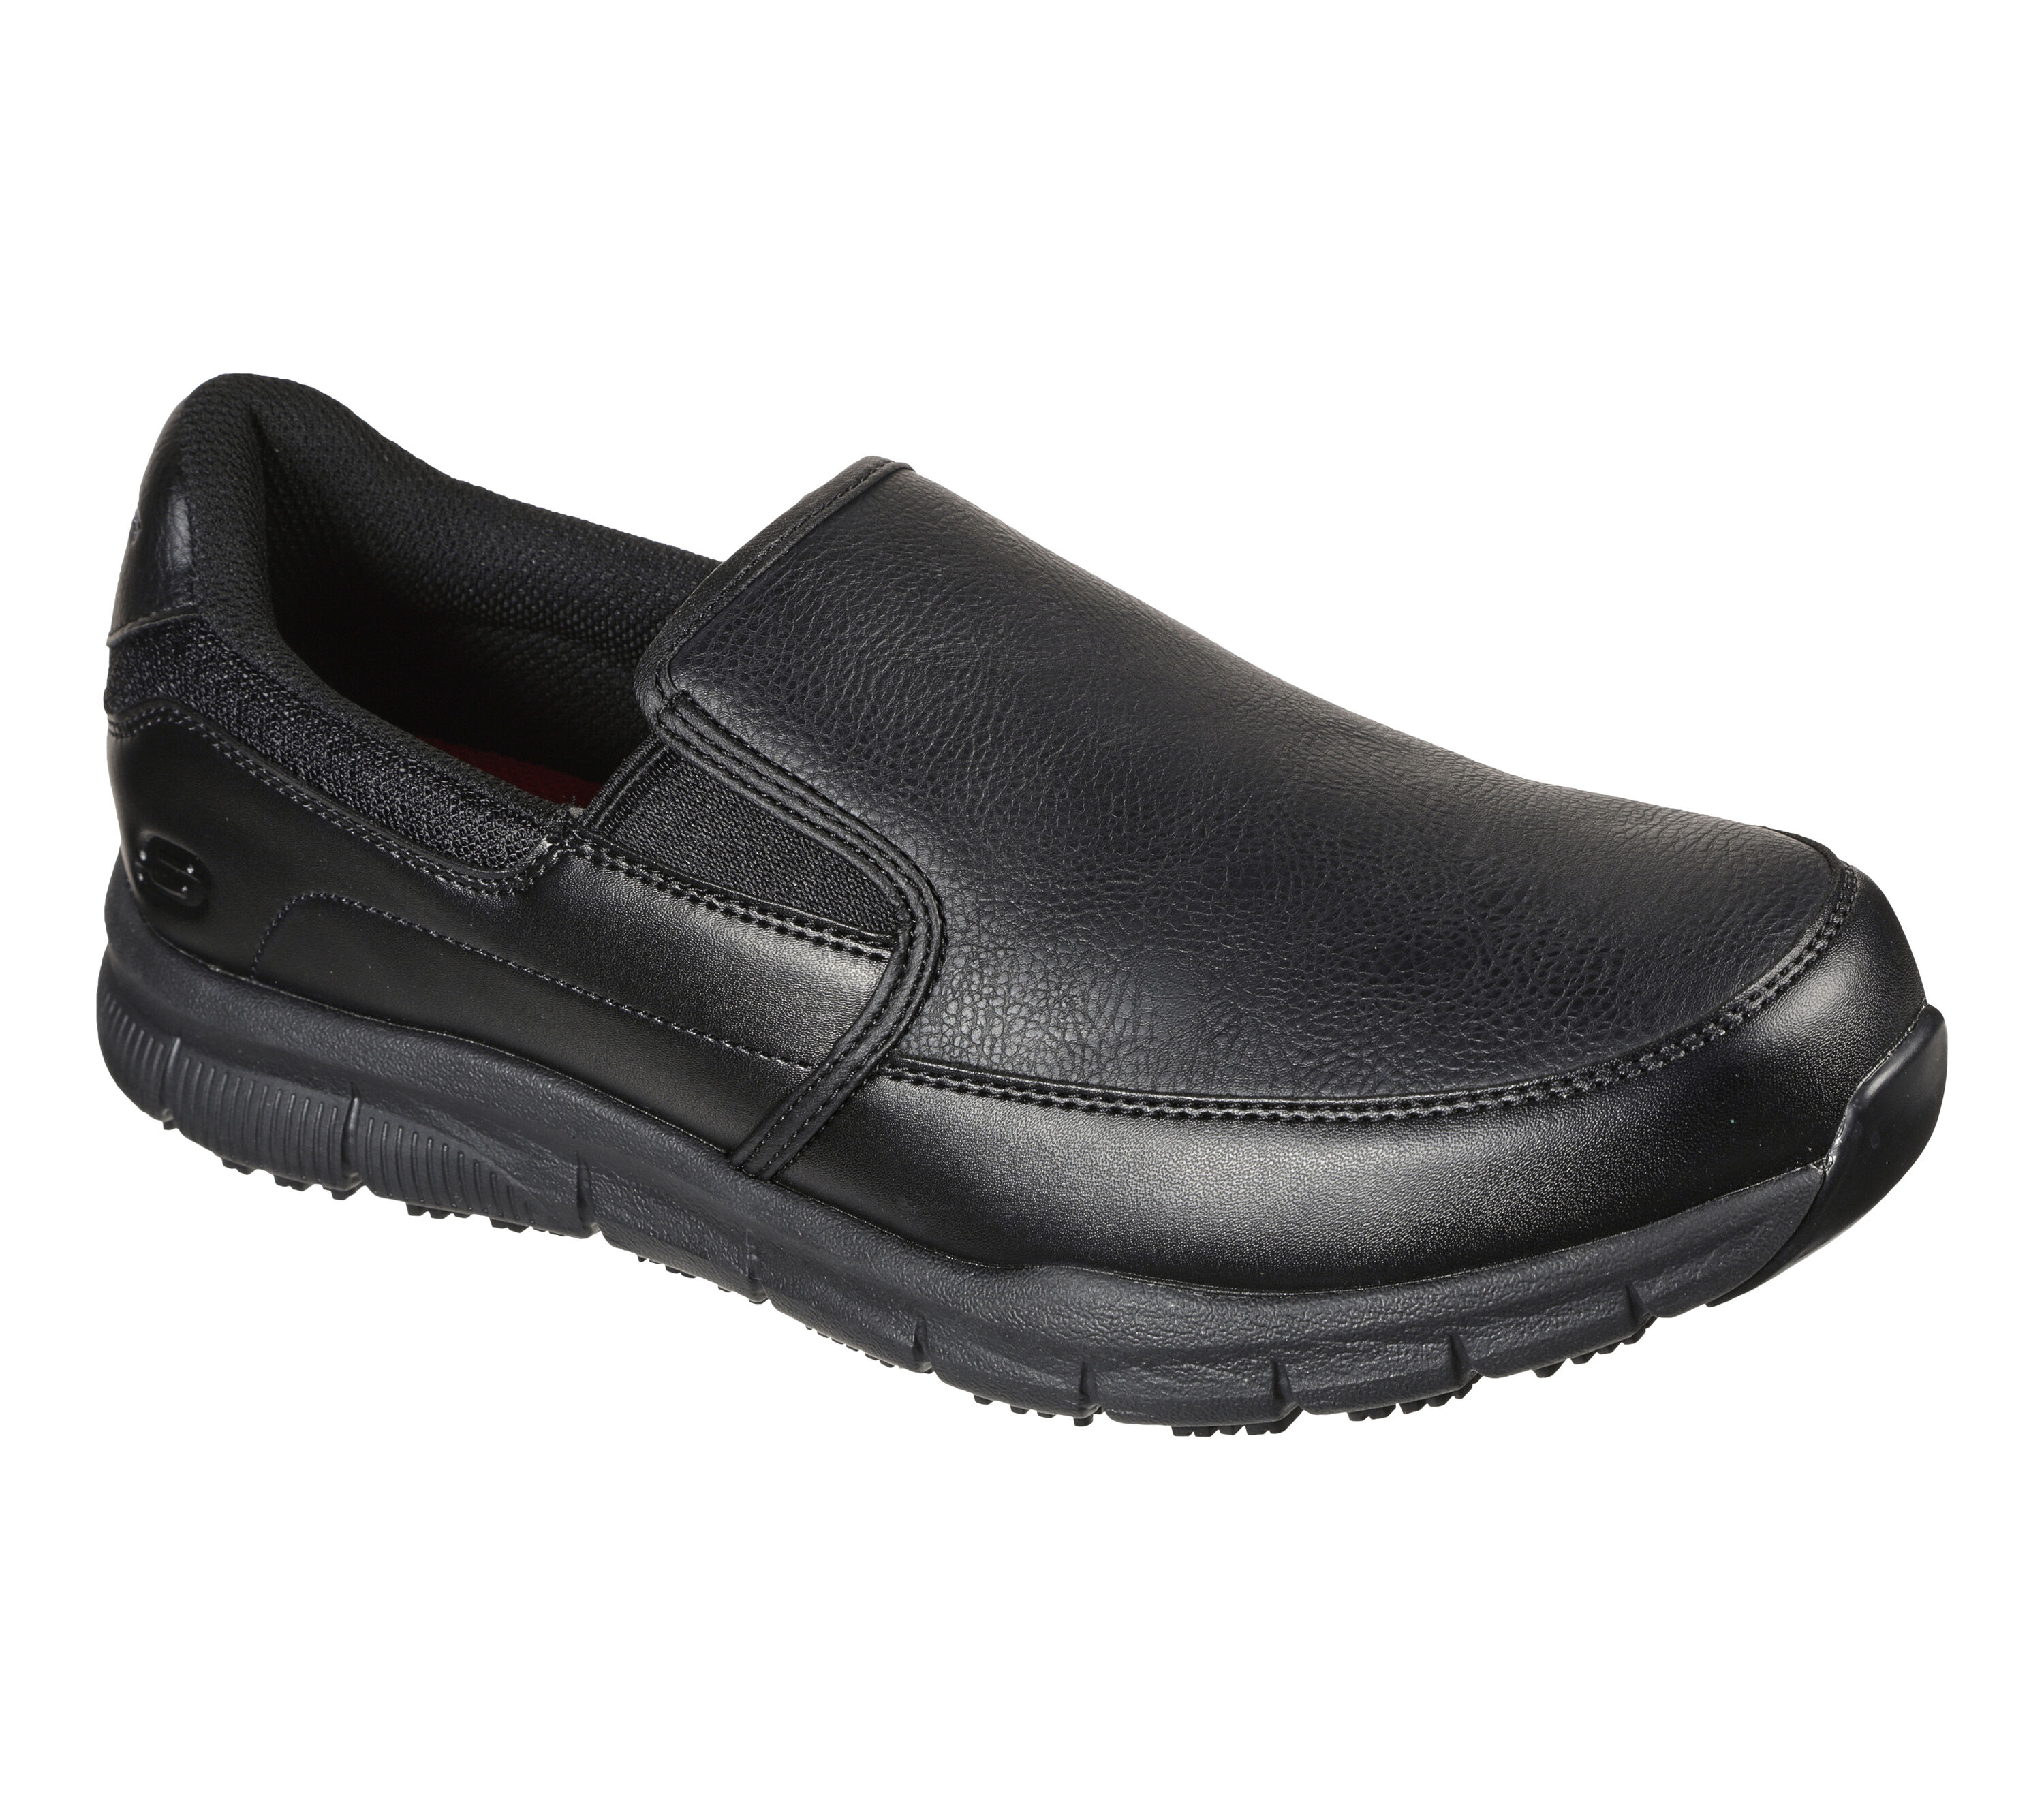 Shop the Work Relaxed Fit: Nampa - Groton SR | SKECHERS